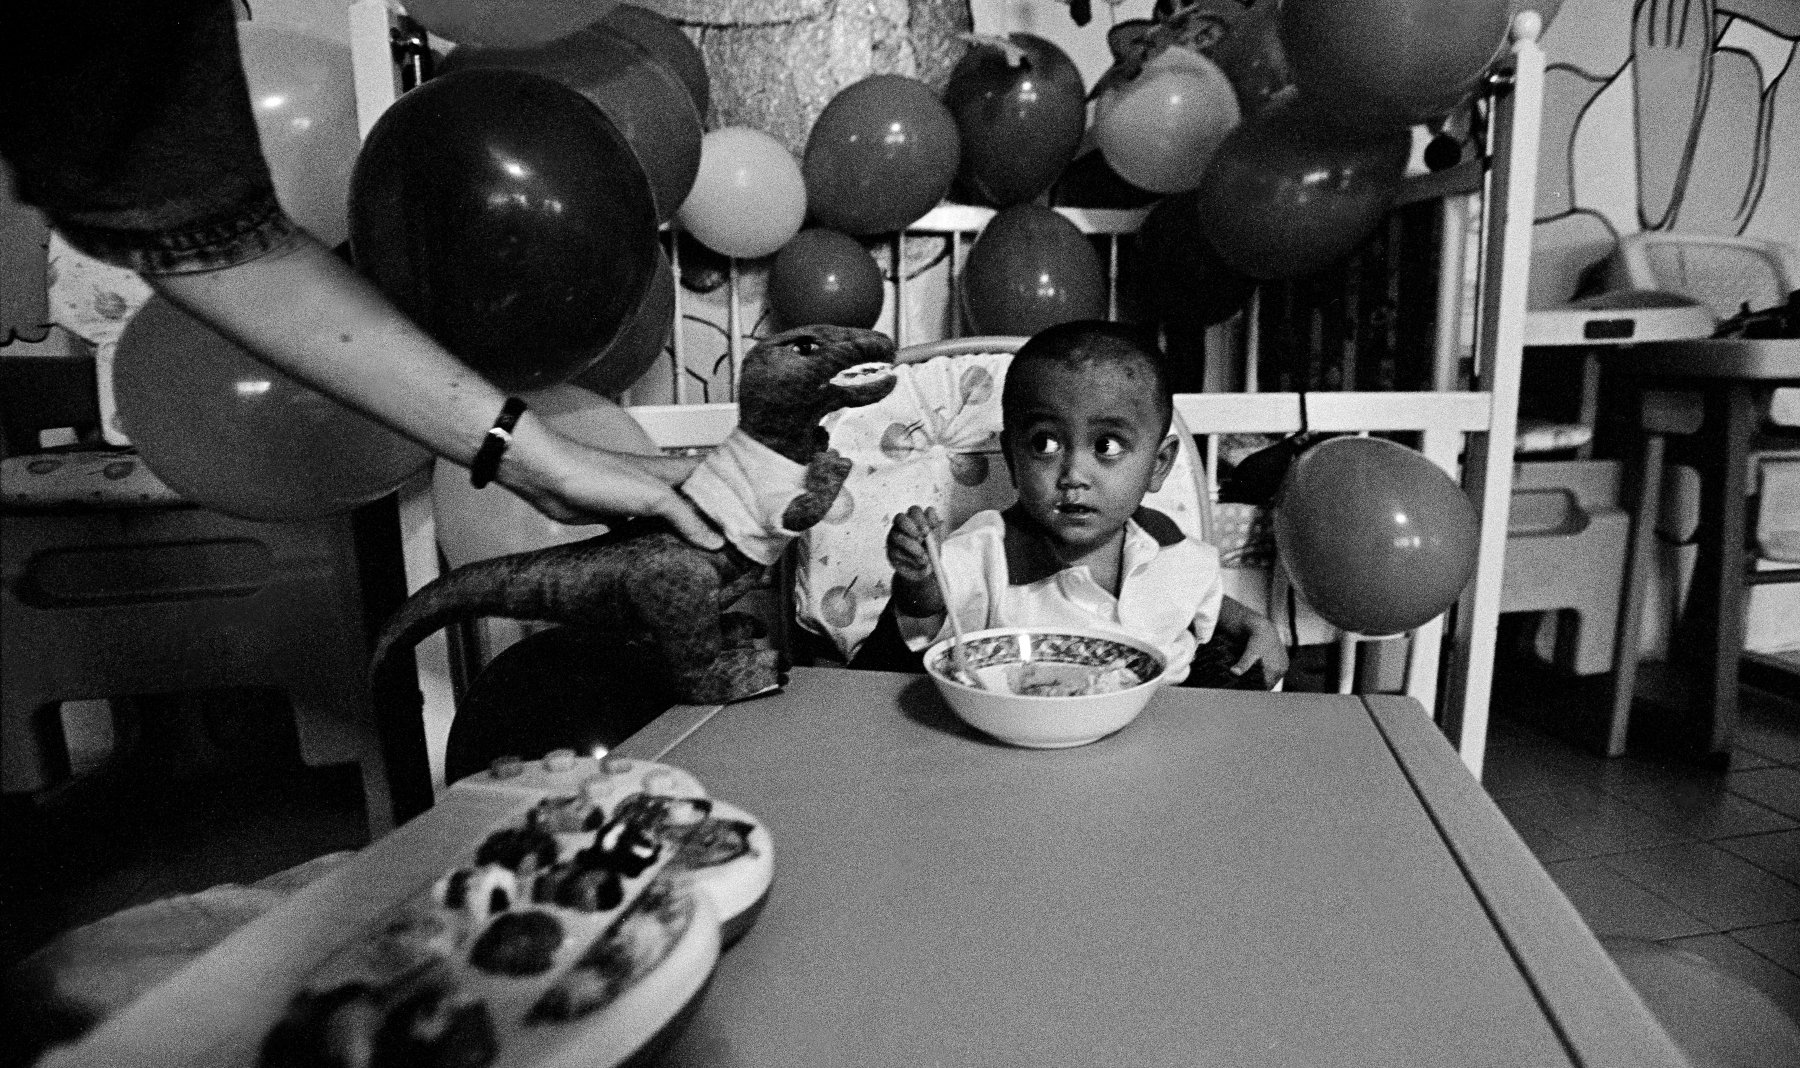  "Birthday Boy" At the Agape orphanage for those living with HIV. Chiang Mai, Thailand. The mid-1990s. 